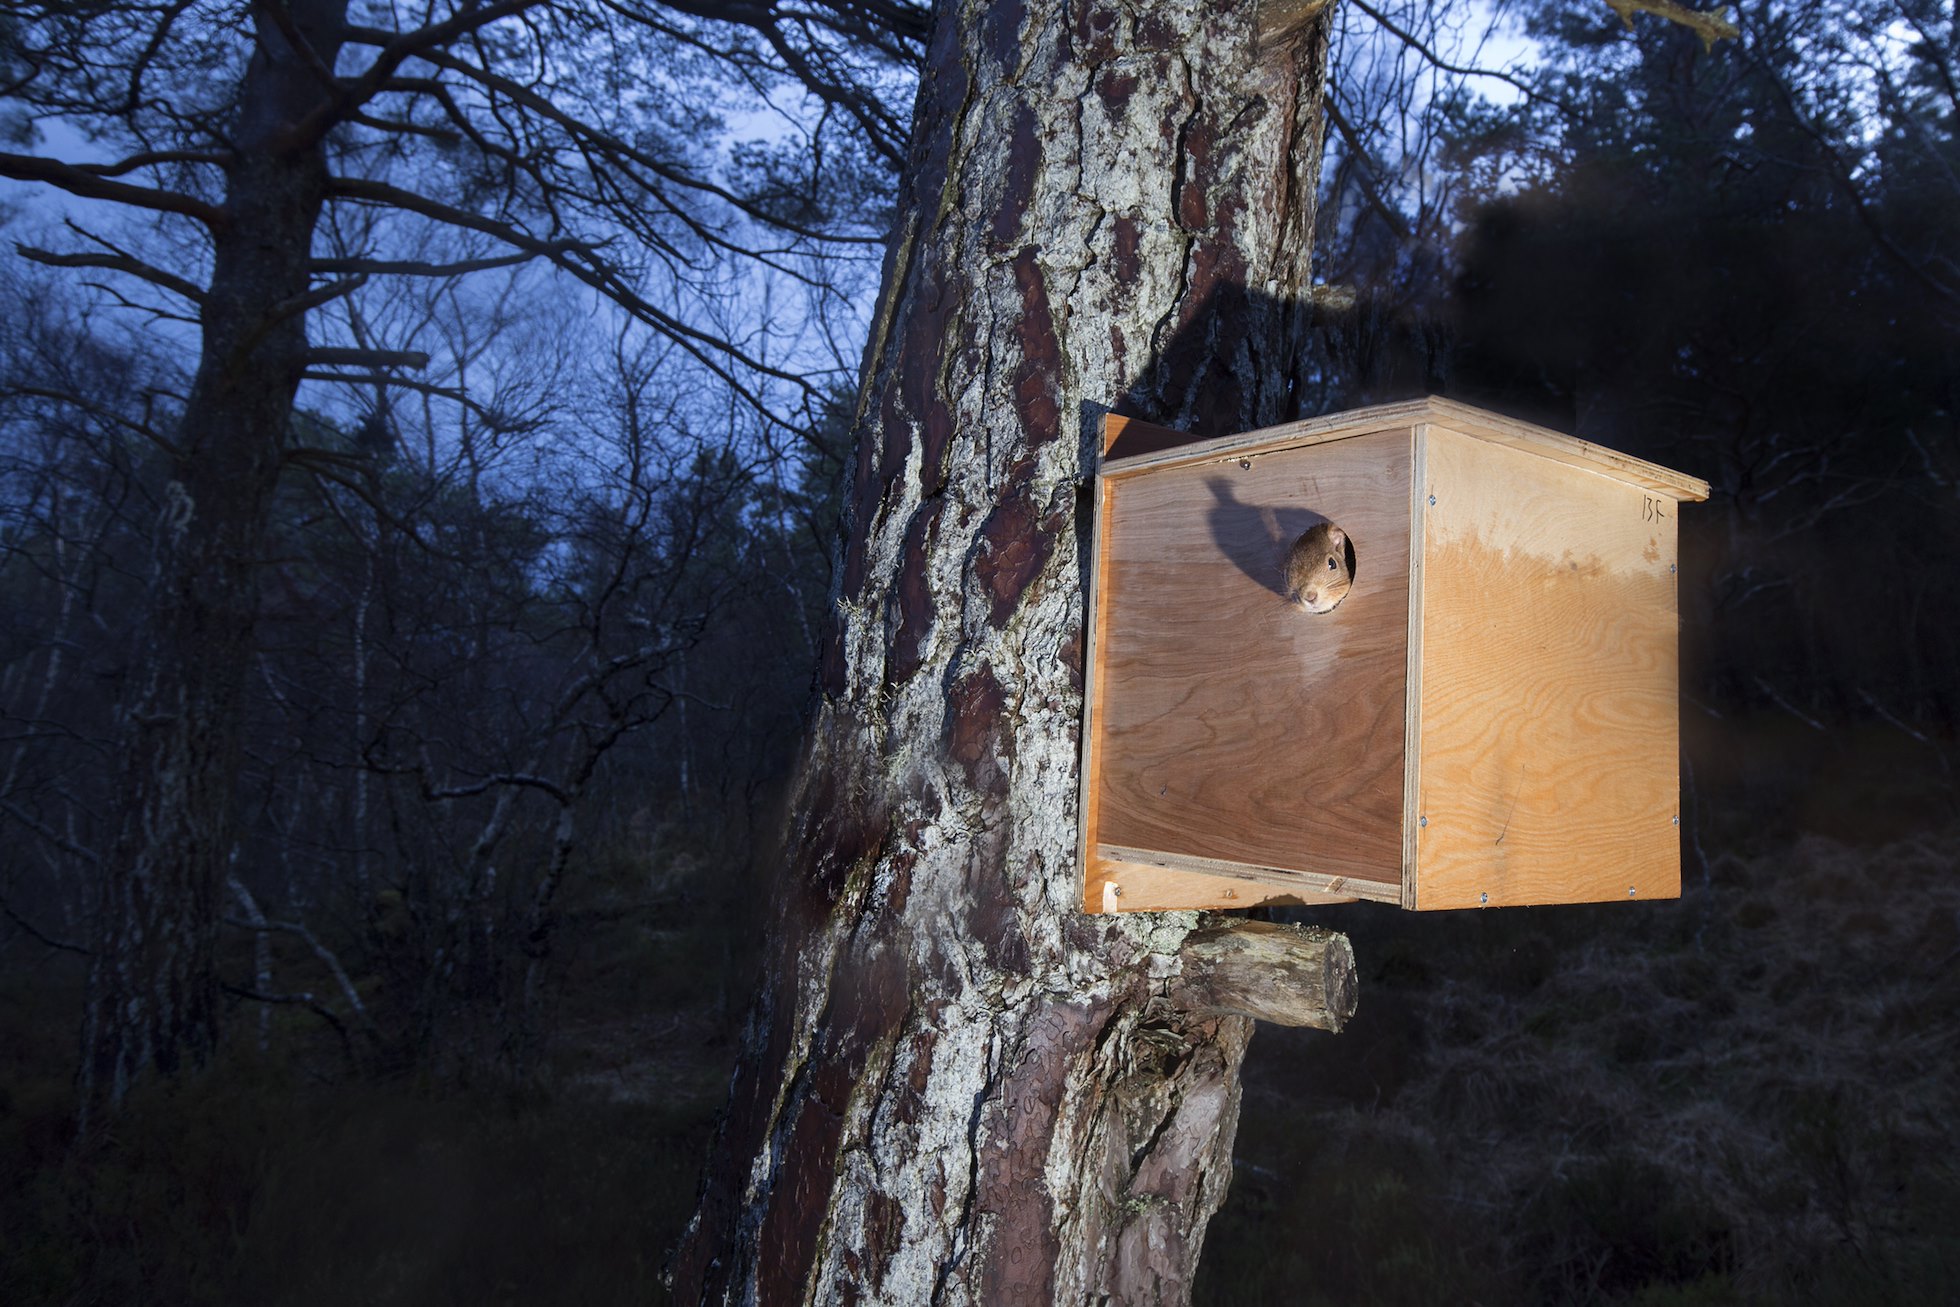 Remote camera shot of red squirrel emerging from transit box following its translocation from Moray to Plockton, Scotland.